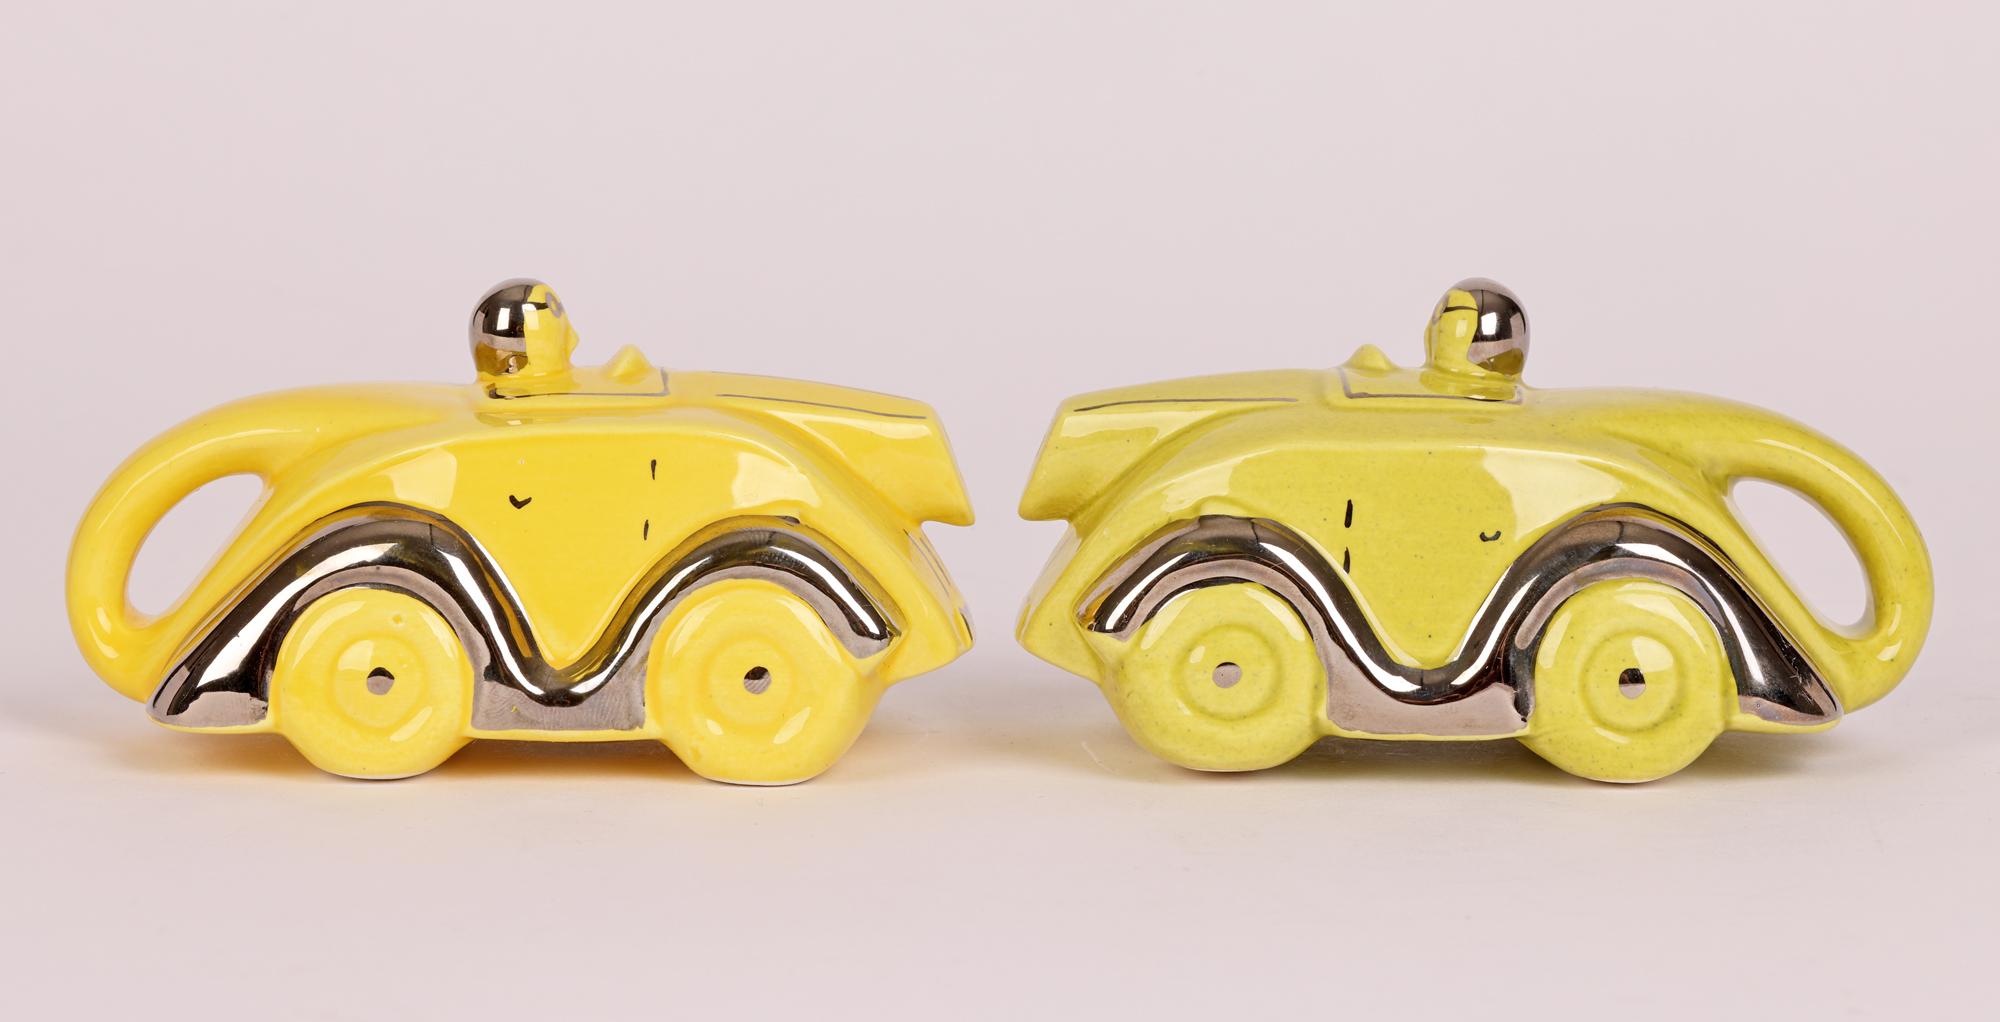 A delightful novelty pair of Art Deco style ceramic cruets modelled as racing cars made by in Staffordshire by Regina Industries and dating from around 1970. The cruets are based on the art deco designs by James Sadler of their racing car teapot